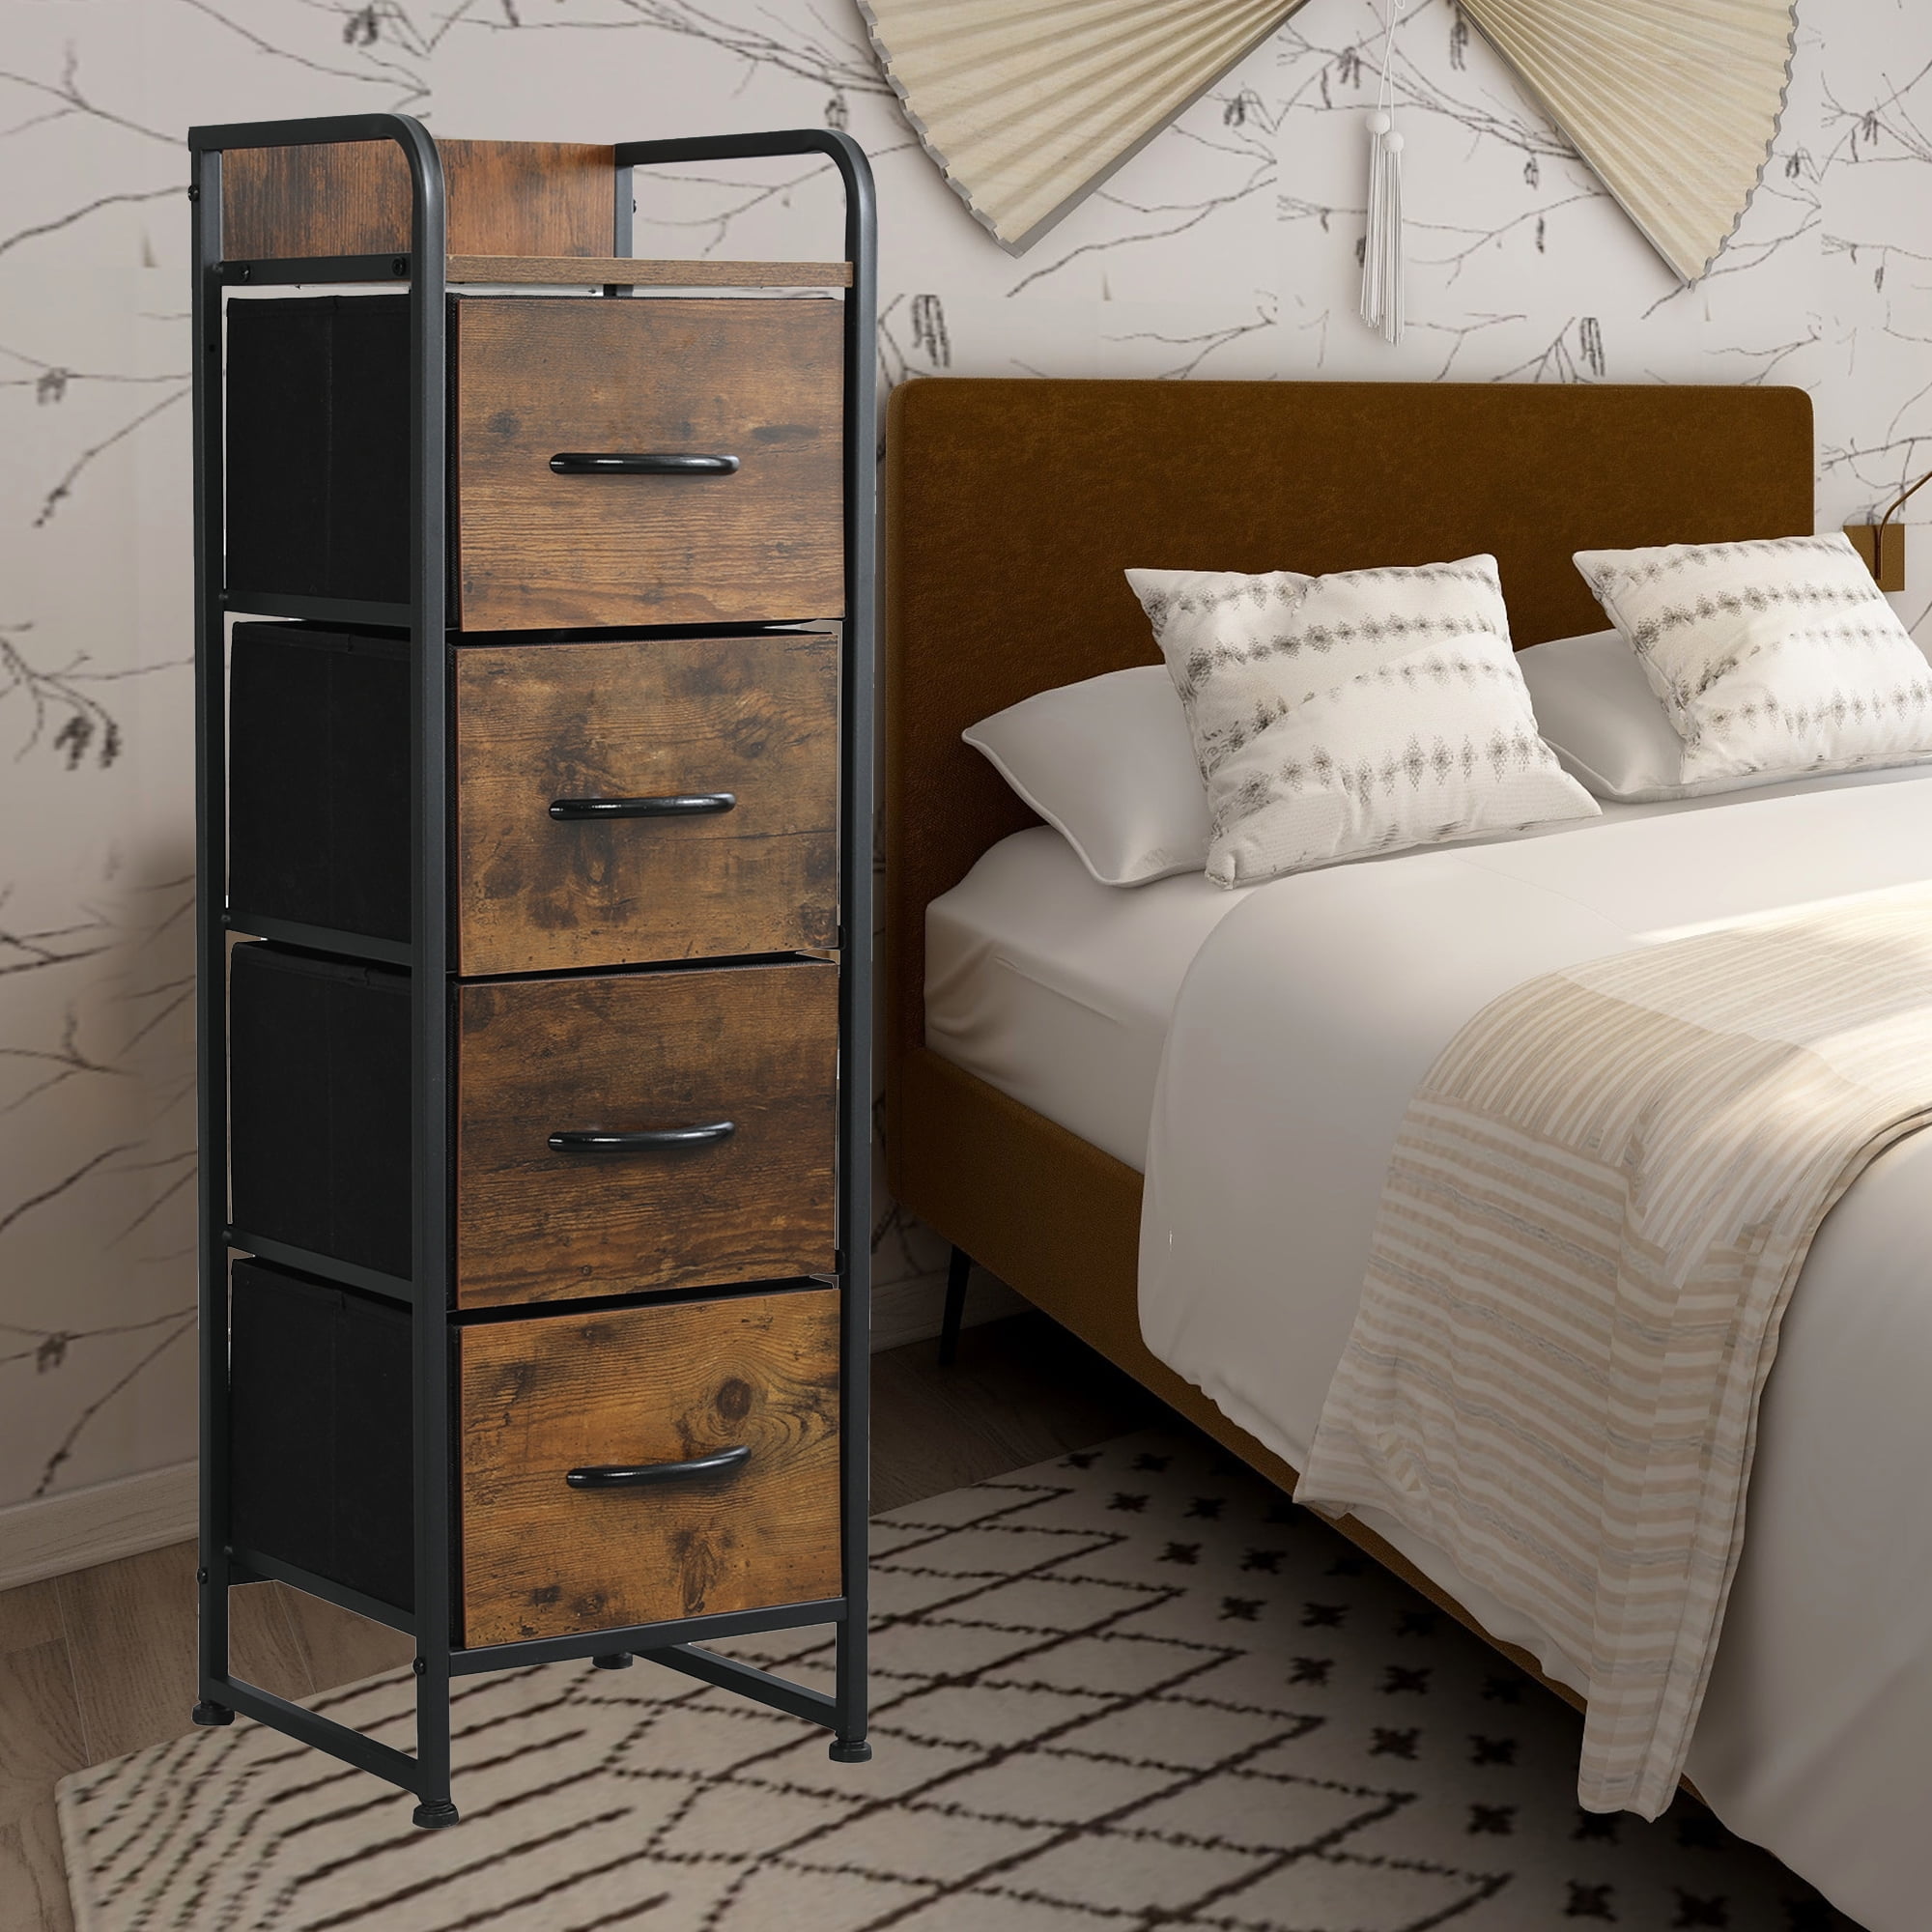 Details about   3-7 Drawers Fabric Dresser Bedside End Table Nightstand Bedroom Storage Tower US 